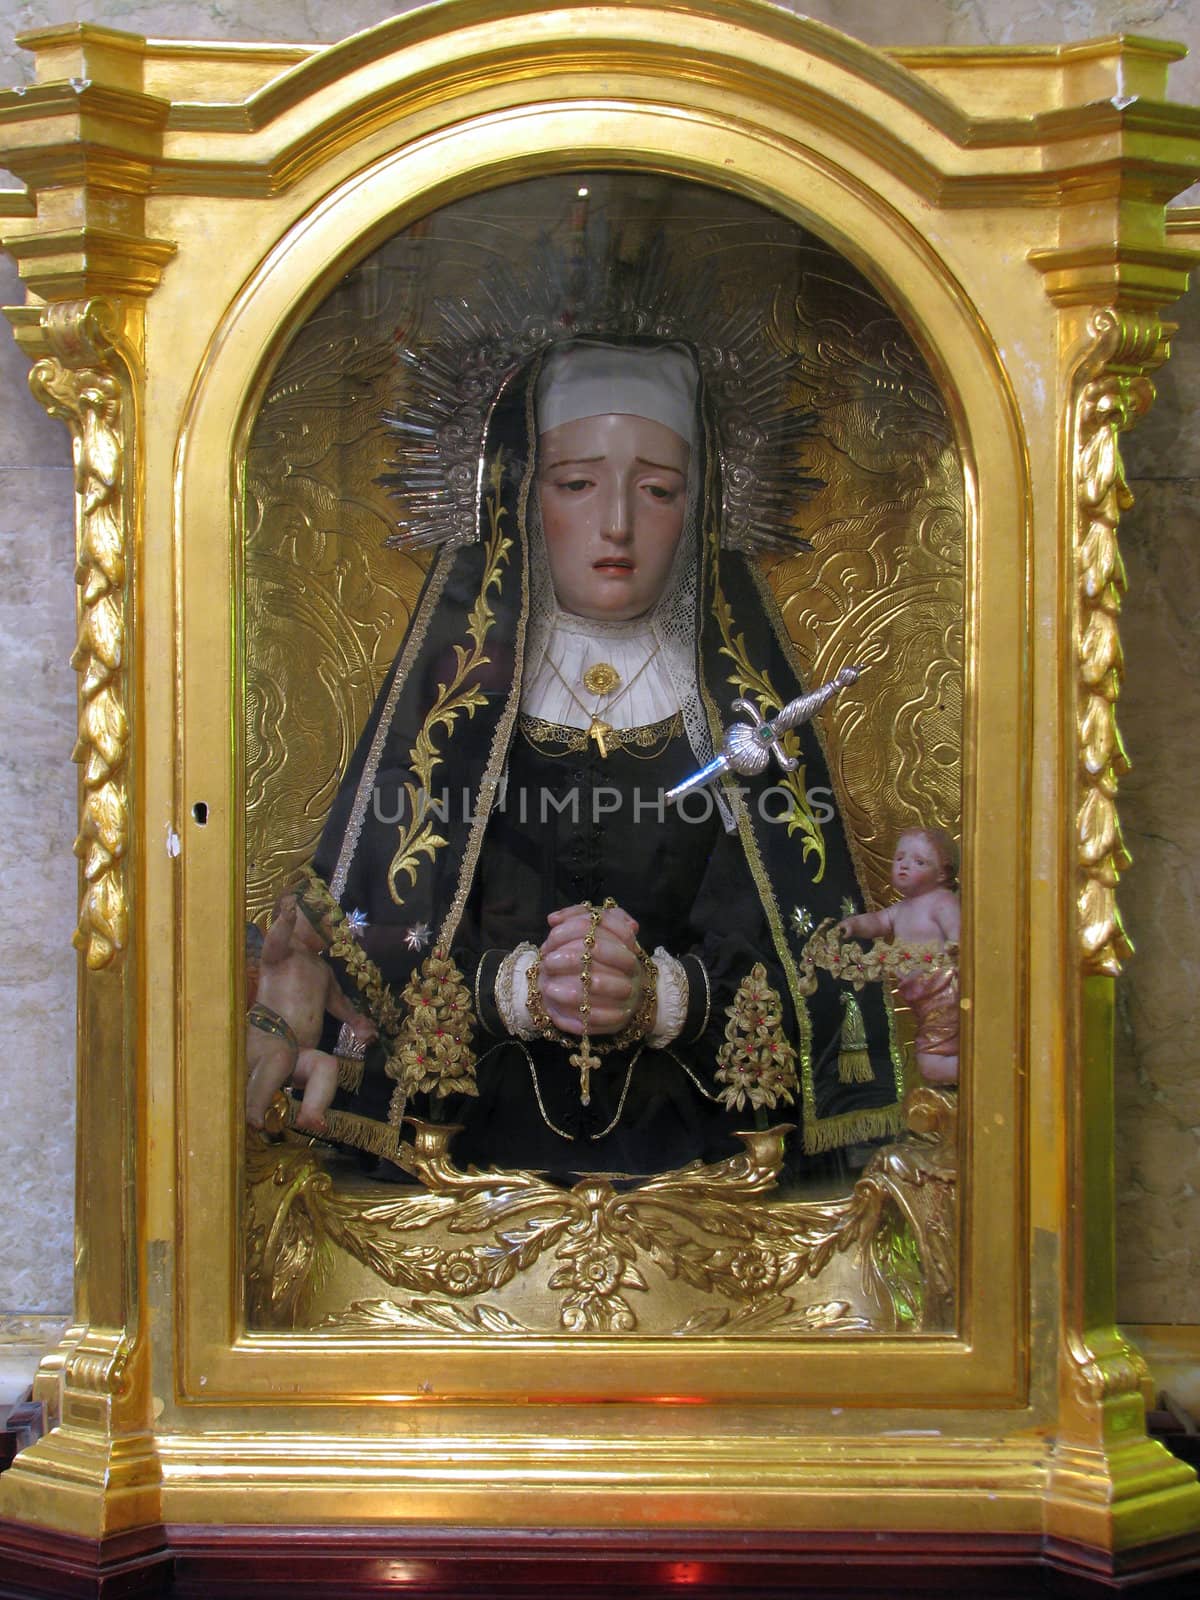 A statue of Our Lady of Sorrows in Vittoriosa, Malta.